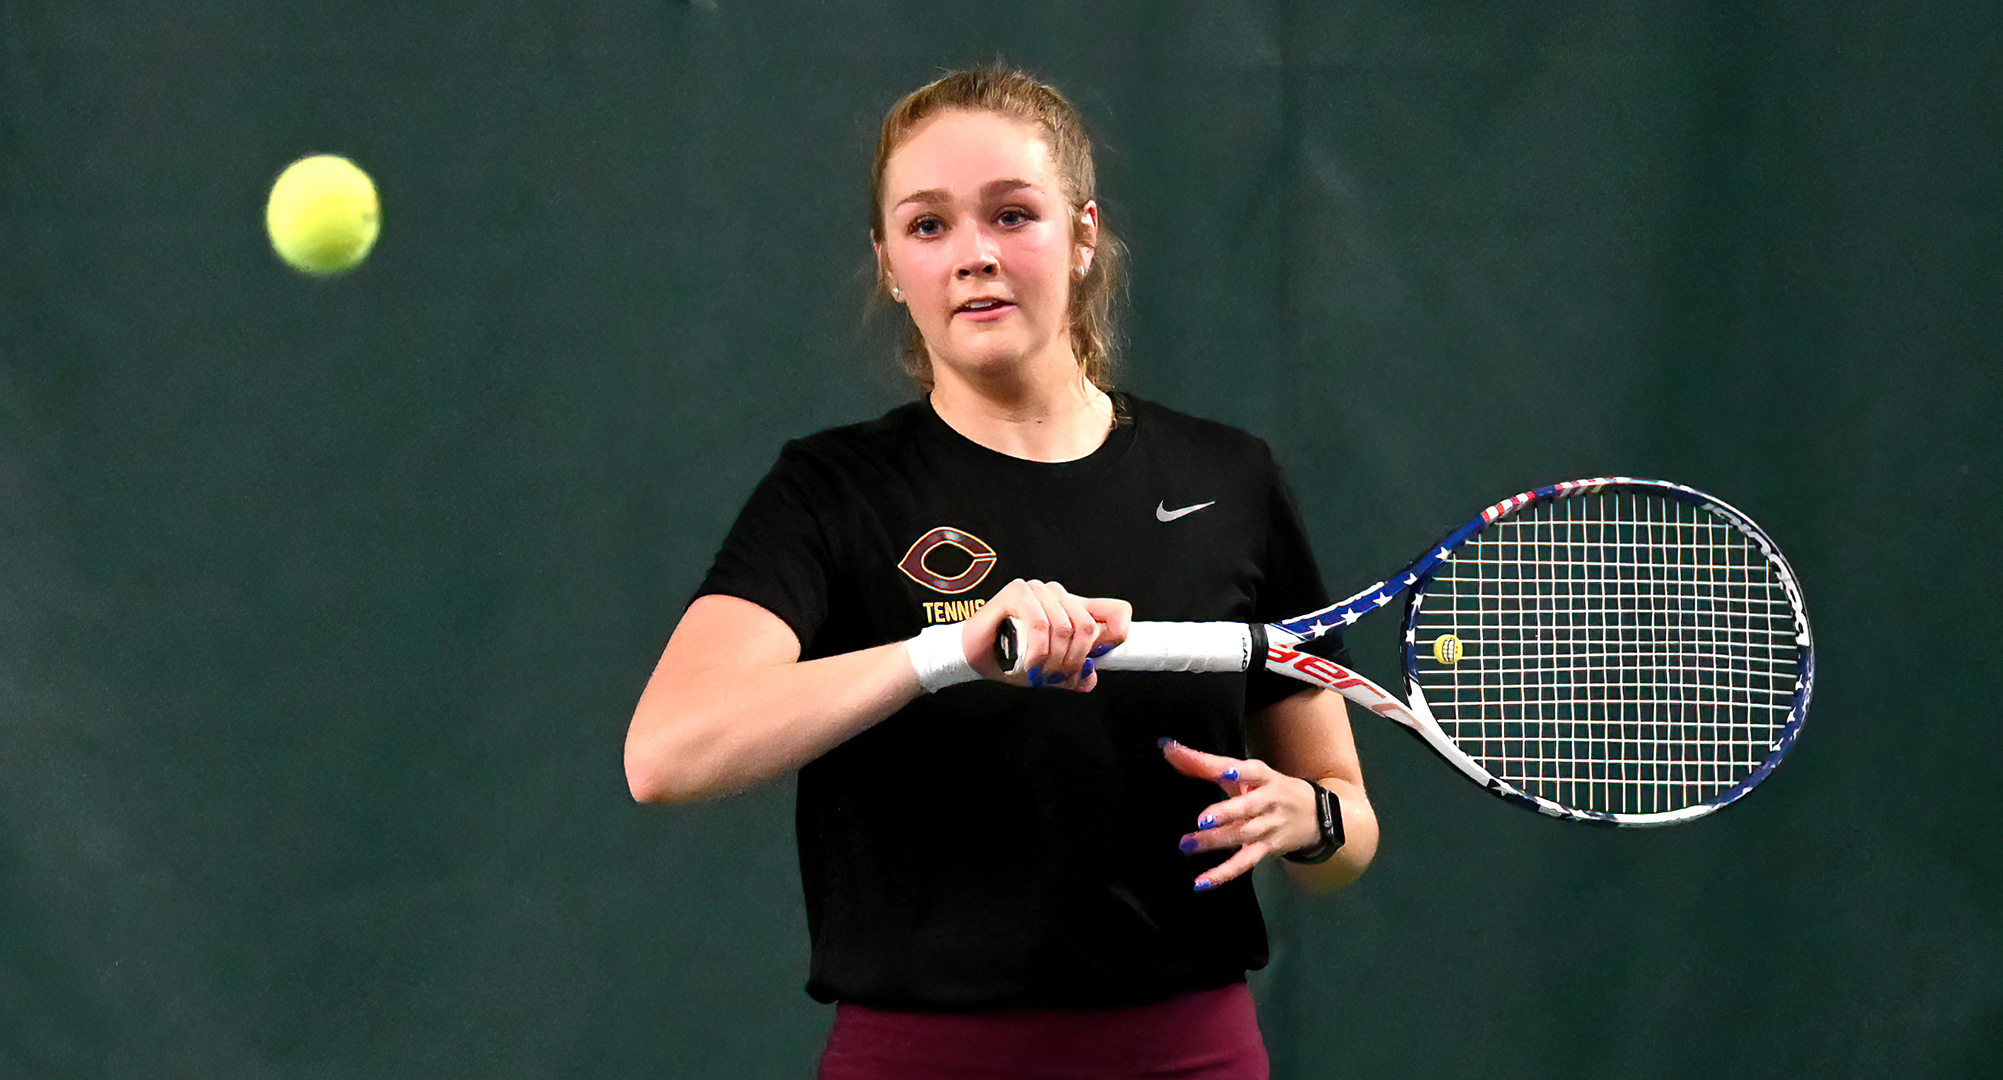 Senior Raquel Egge collected two of the three team points in the Cobbers' match at UW-Superior on the team's weekend in Duluth.